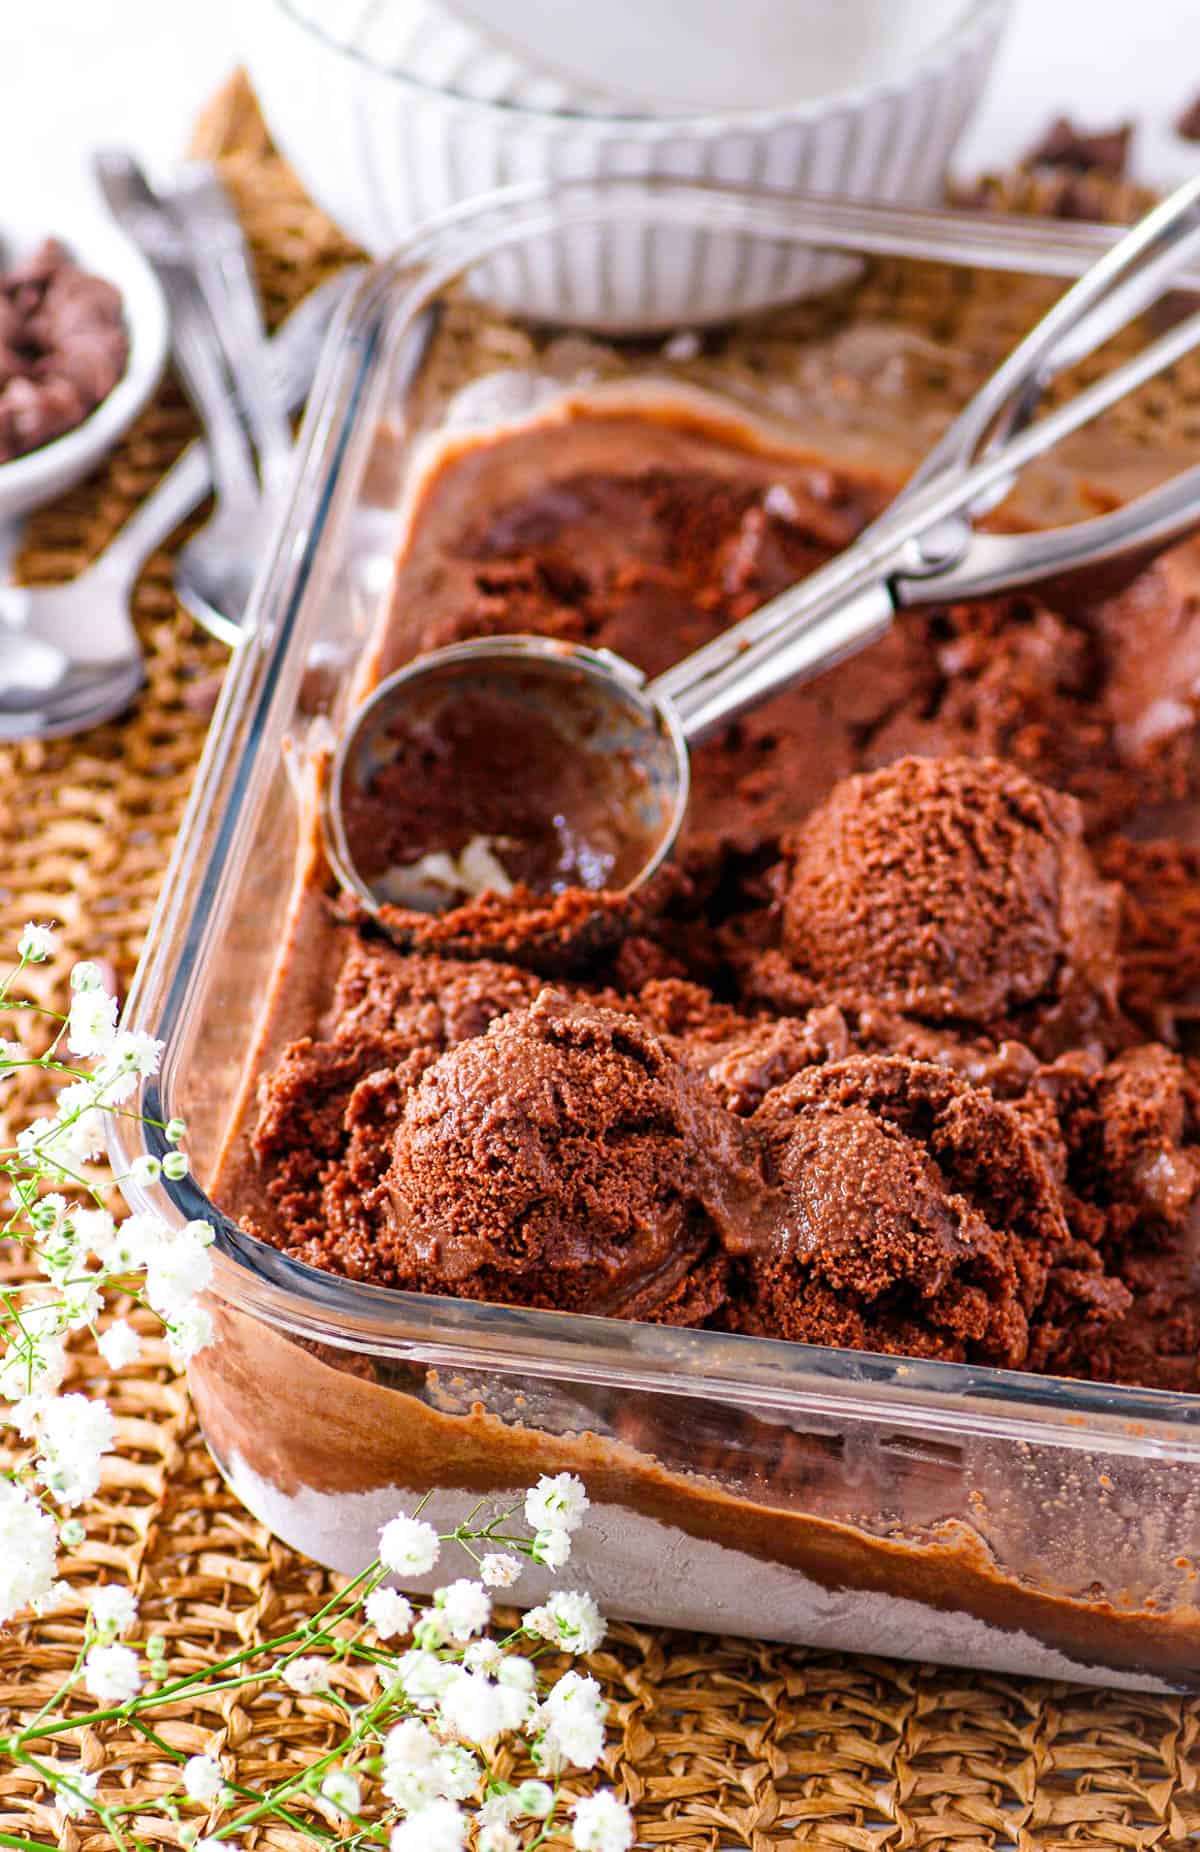 Scoops of chocolate tofu ice cream on top of chocolate ice cream in a glass serving dish.